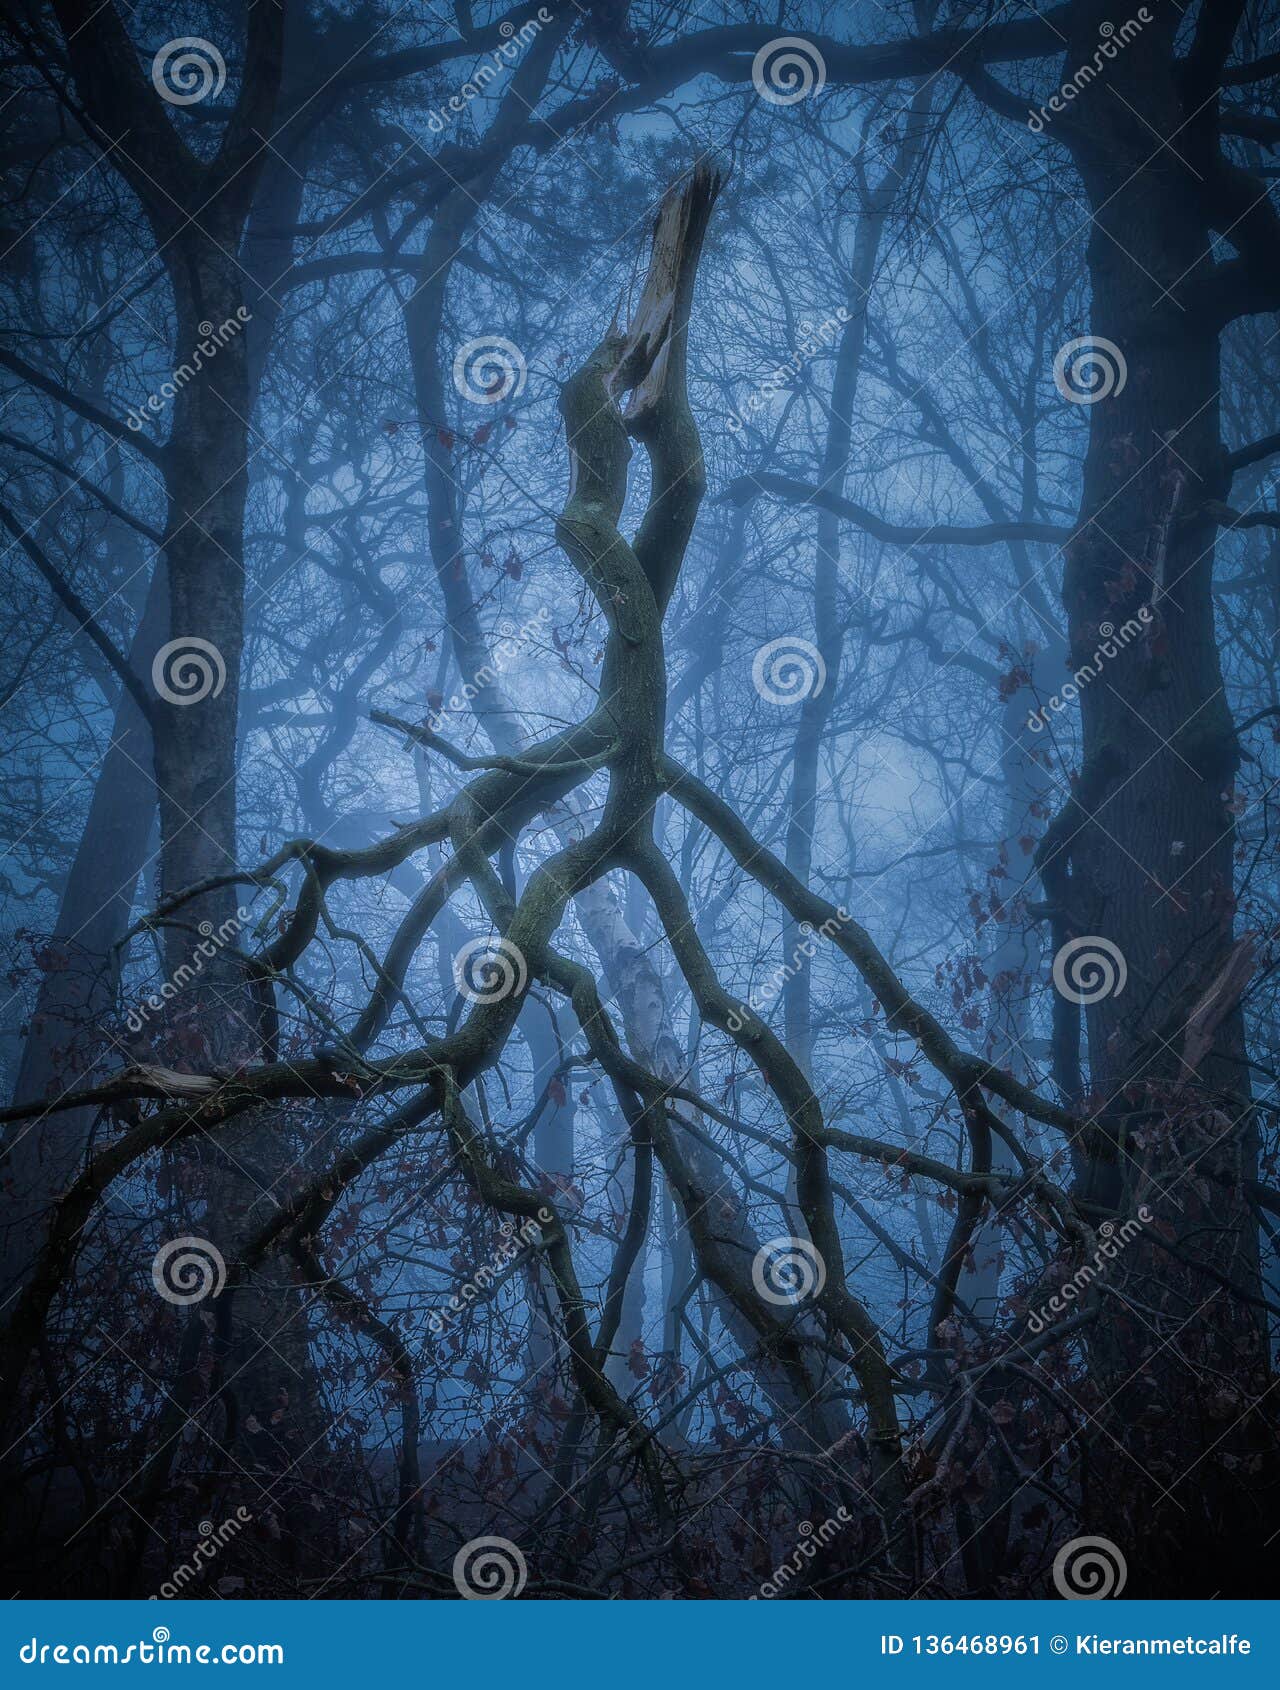 Two Entwined Branches Fallen from a Tree in a Foggy Forest Stock Image